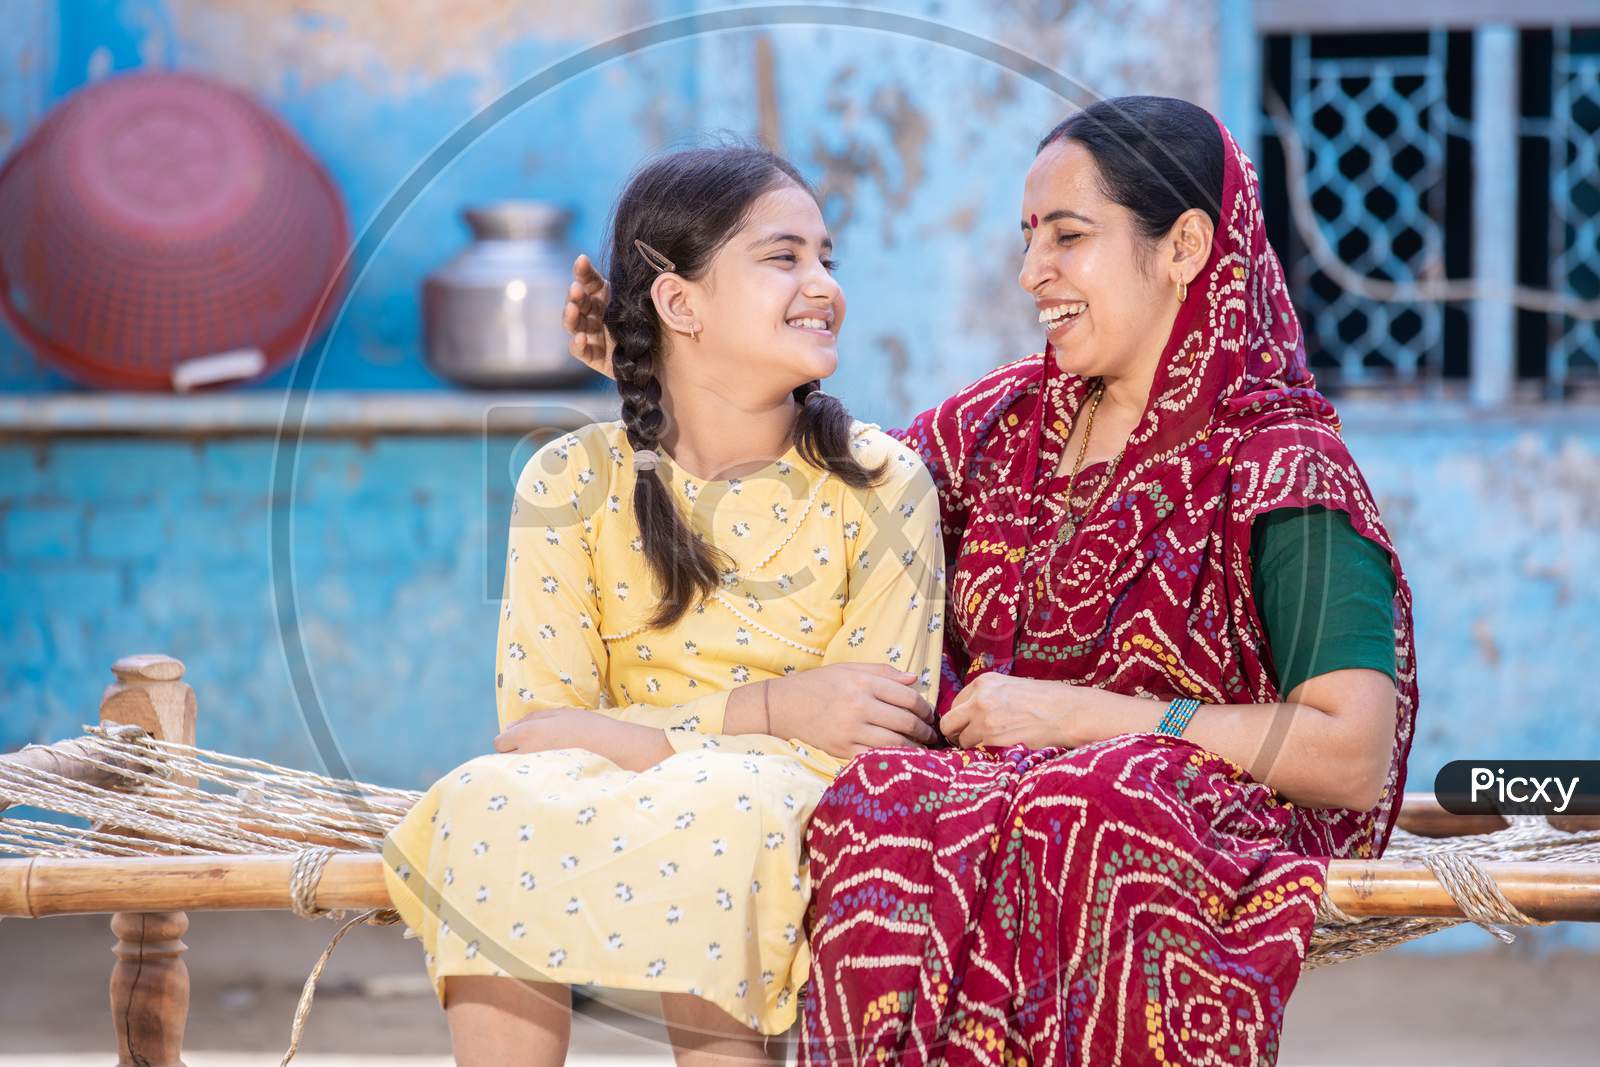 Smiling Young Indian Mother And Adorable Little Daughter Having A Good Time Together,Sitting On Traditional Bed, Cute Child Girl In Braided Hair And Mum In Red Sari Looking At Each Other